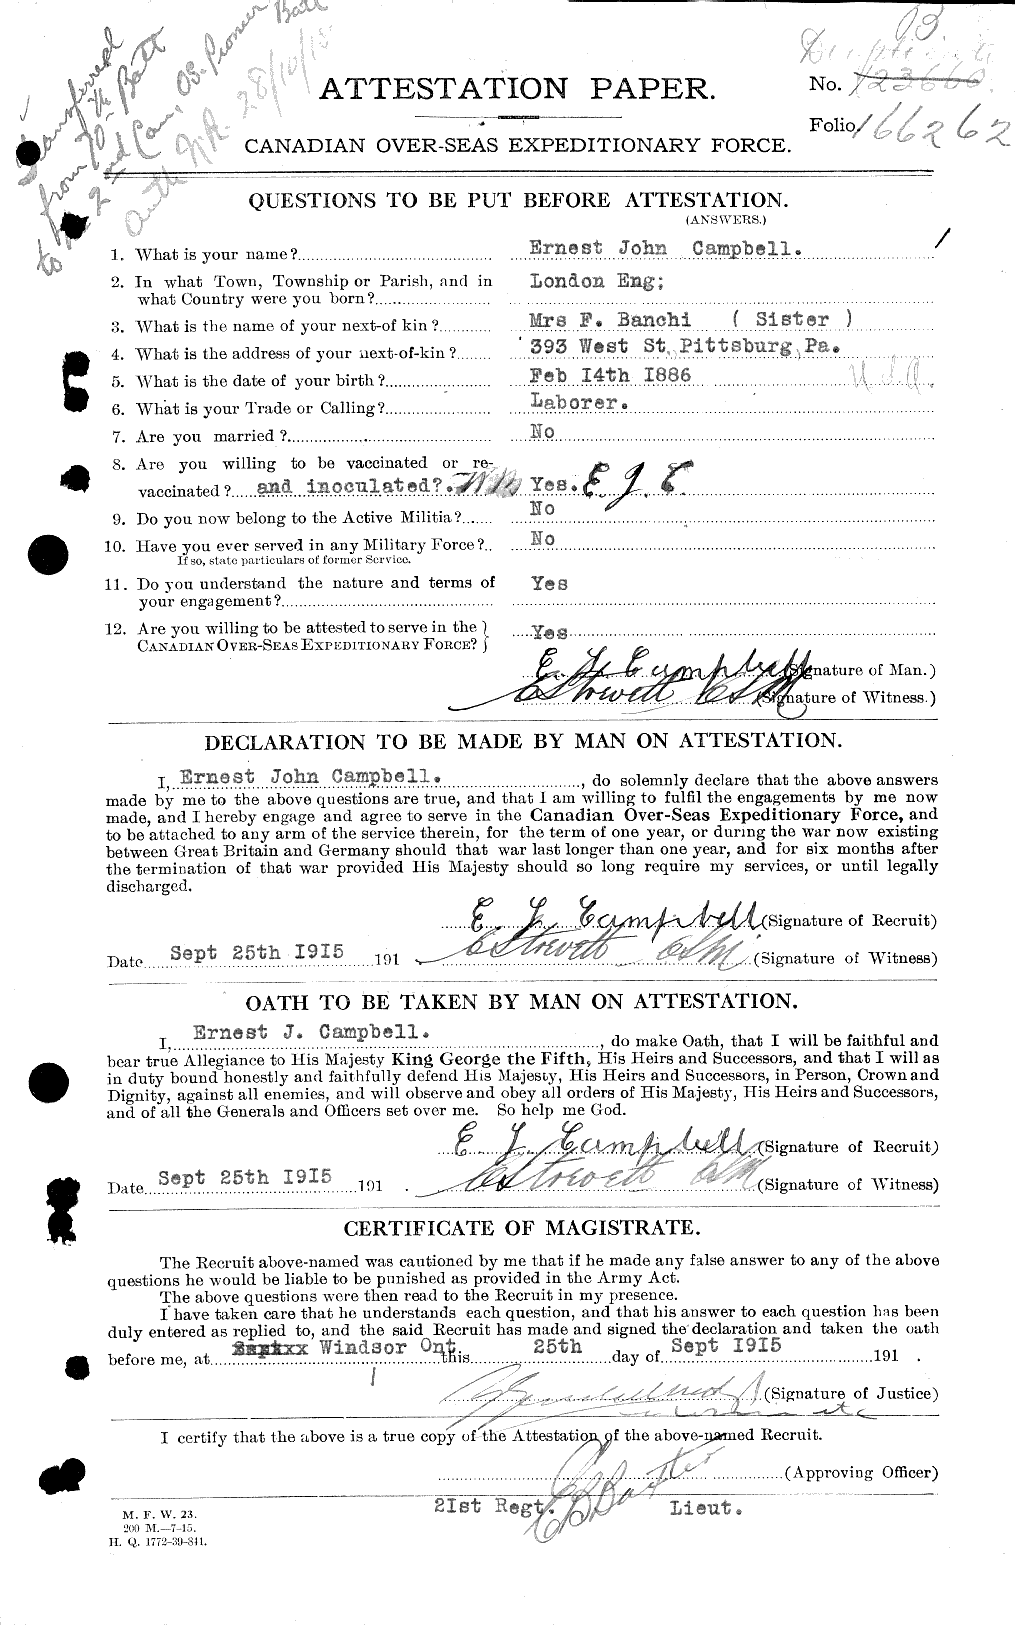 Personnel Records of the First World War - CEF 003685a